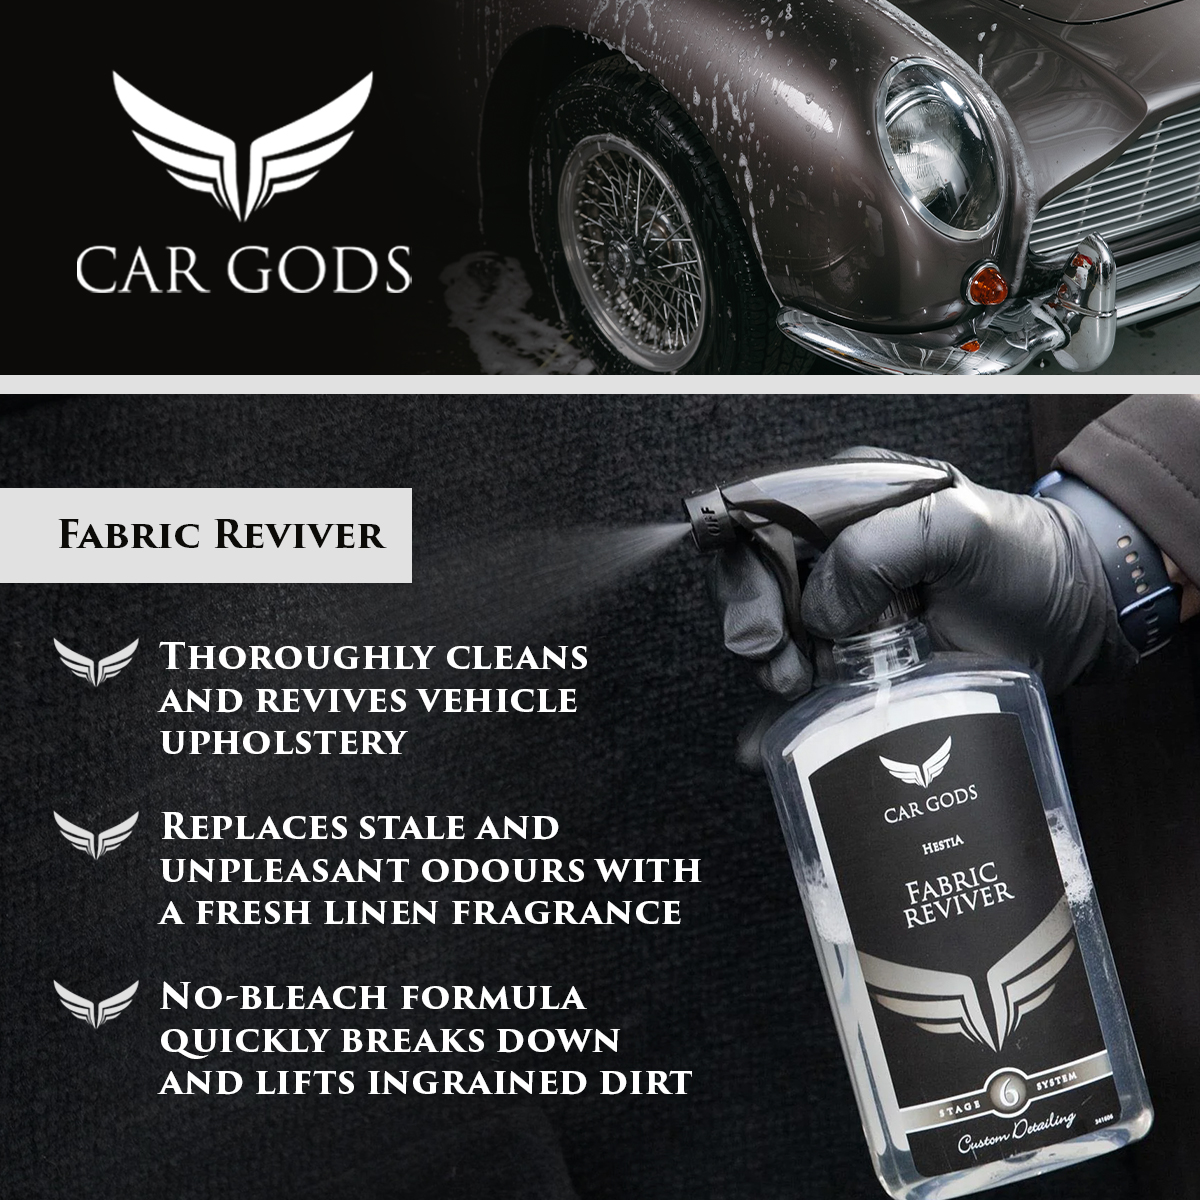 Car Gods Fabric Reviver. Restore your car’s interior fabrics to a like-new condition with this no-bleach formula. Quickly break down and lift ingrained dirt to thoroughly clean and revive vehicle upholstery. Replace stale and unpleasant odours with a fresh linen fragrance.